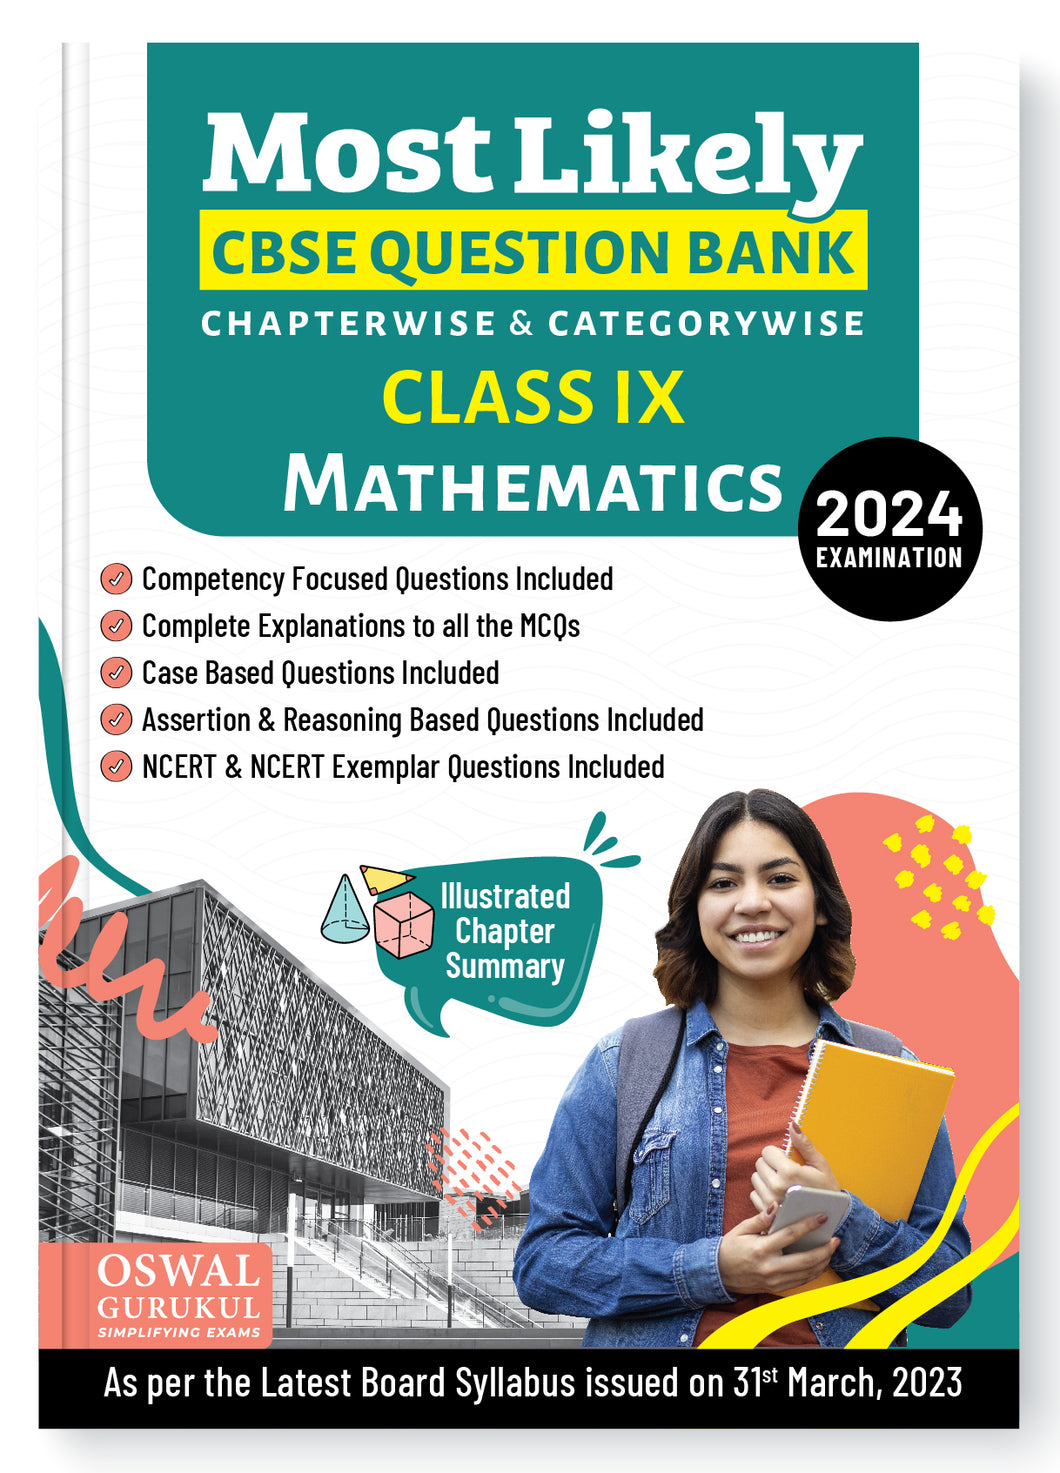 Oswal - Gurukul Mathematics Most Likely CBSE Question Bank for Class 9 Exam 2024 - Chapterwise & Categorywise, New Paper Pattern (MCQs, Case, Assertion & Reasoning, NCERT & NCERT Exemplar Questions)